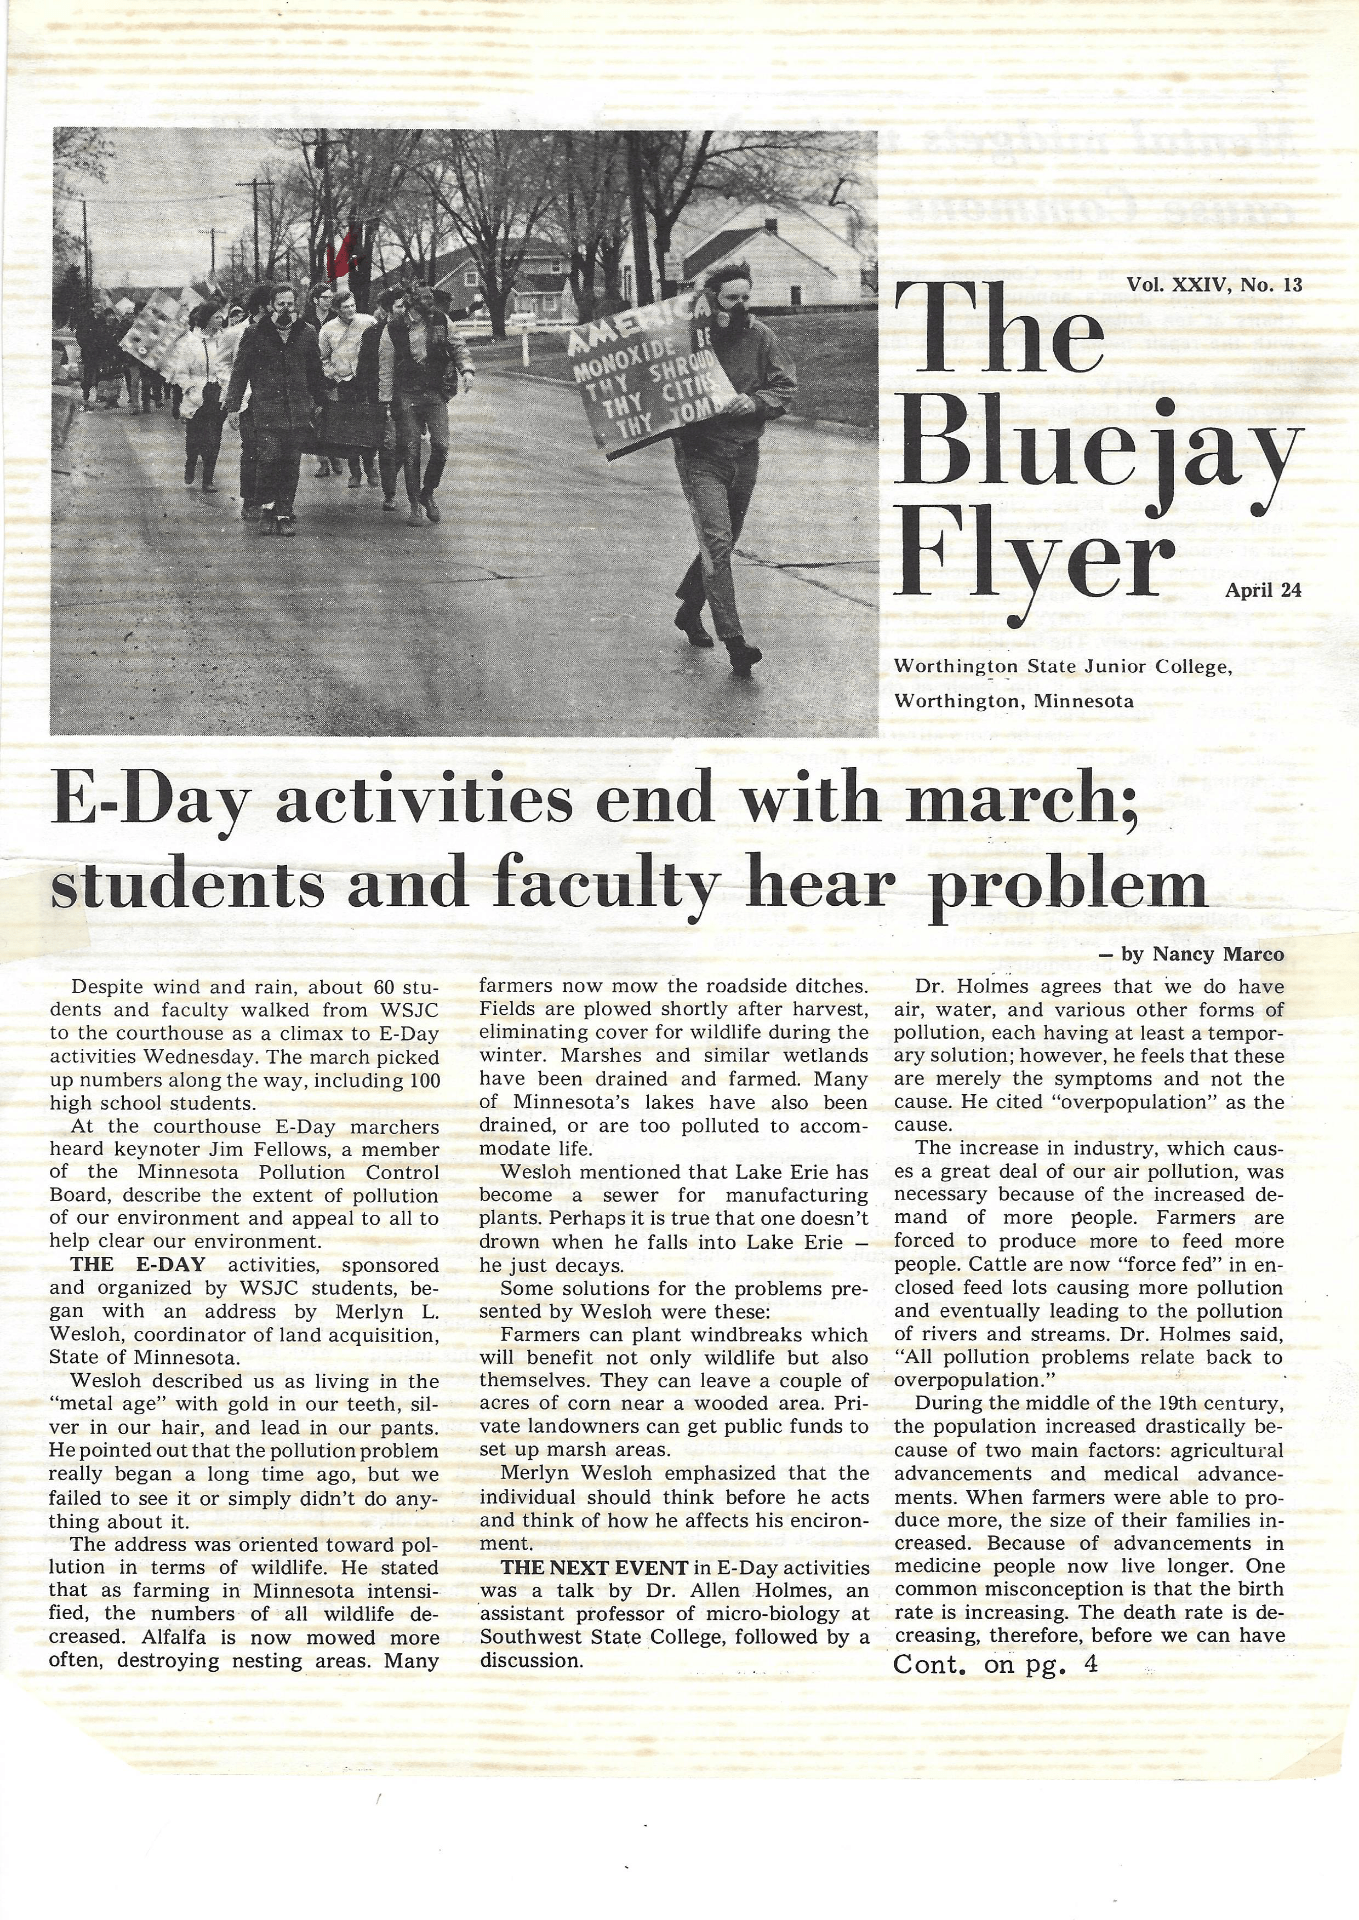 scanned newspaper article about a march on a college campus